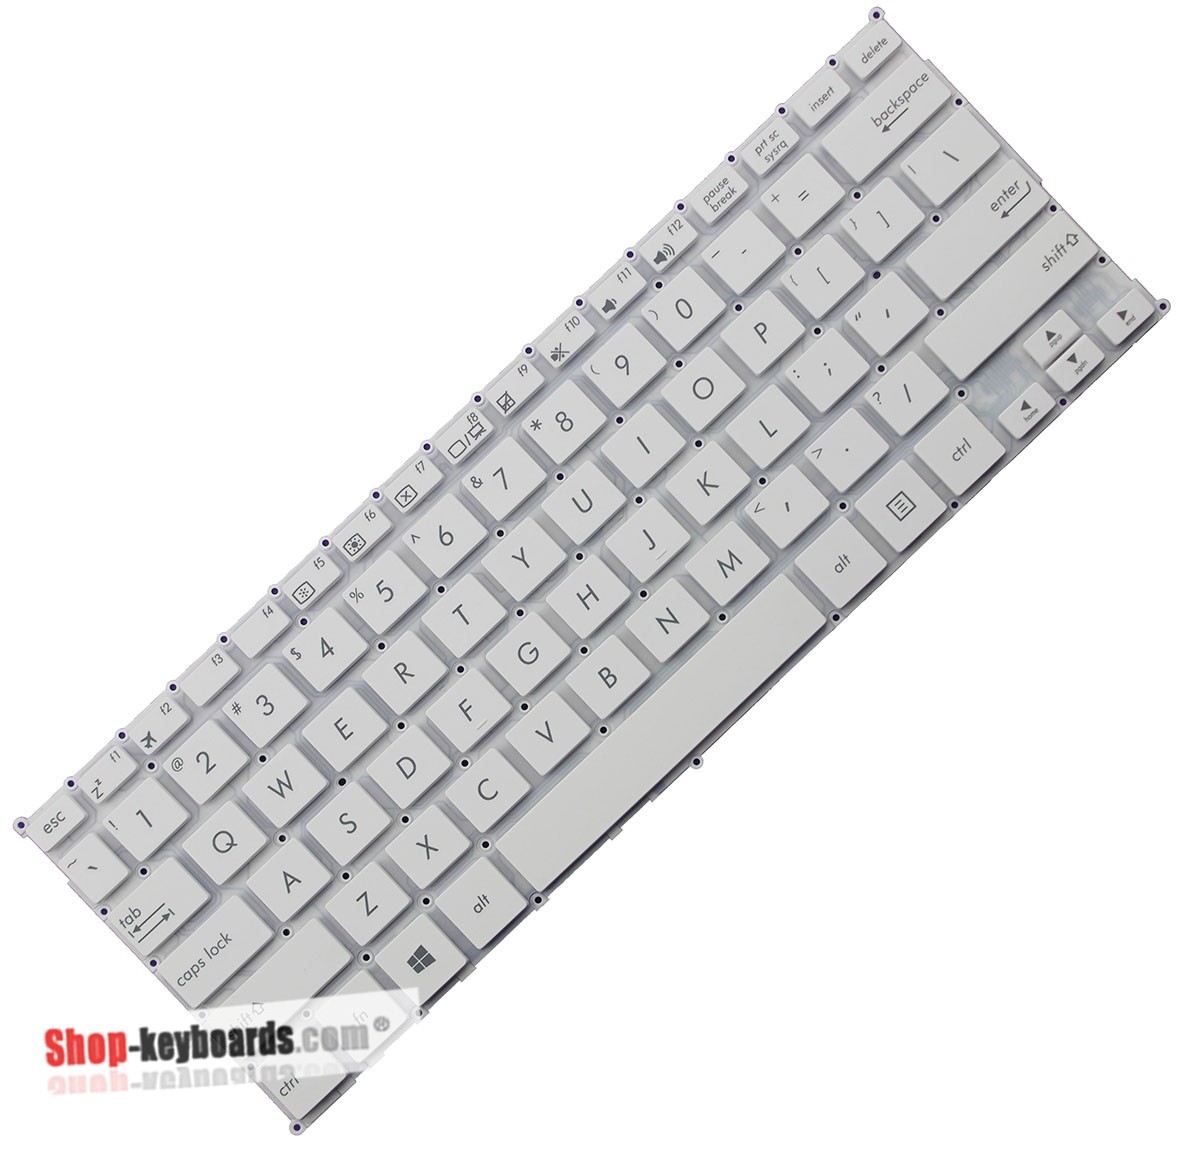 Asus 0KNL0-1100LA00  Keyboard replacement